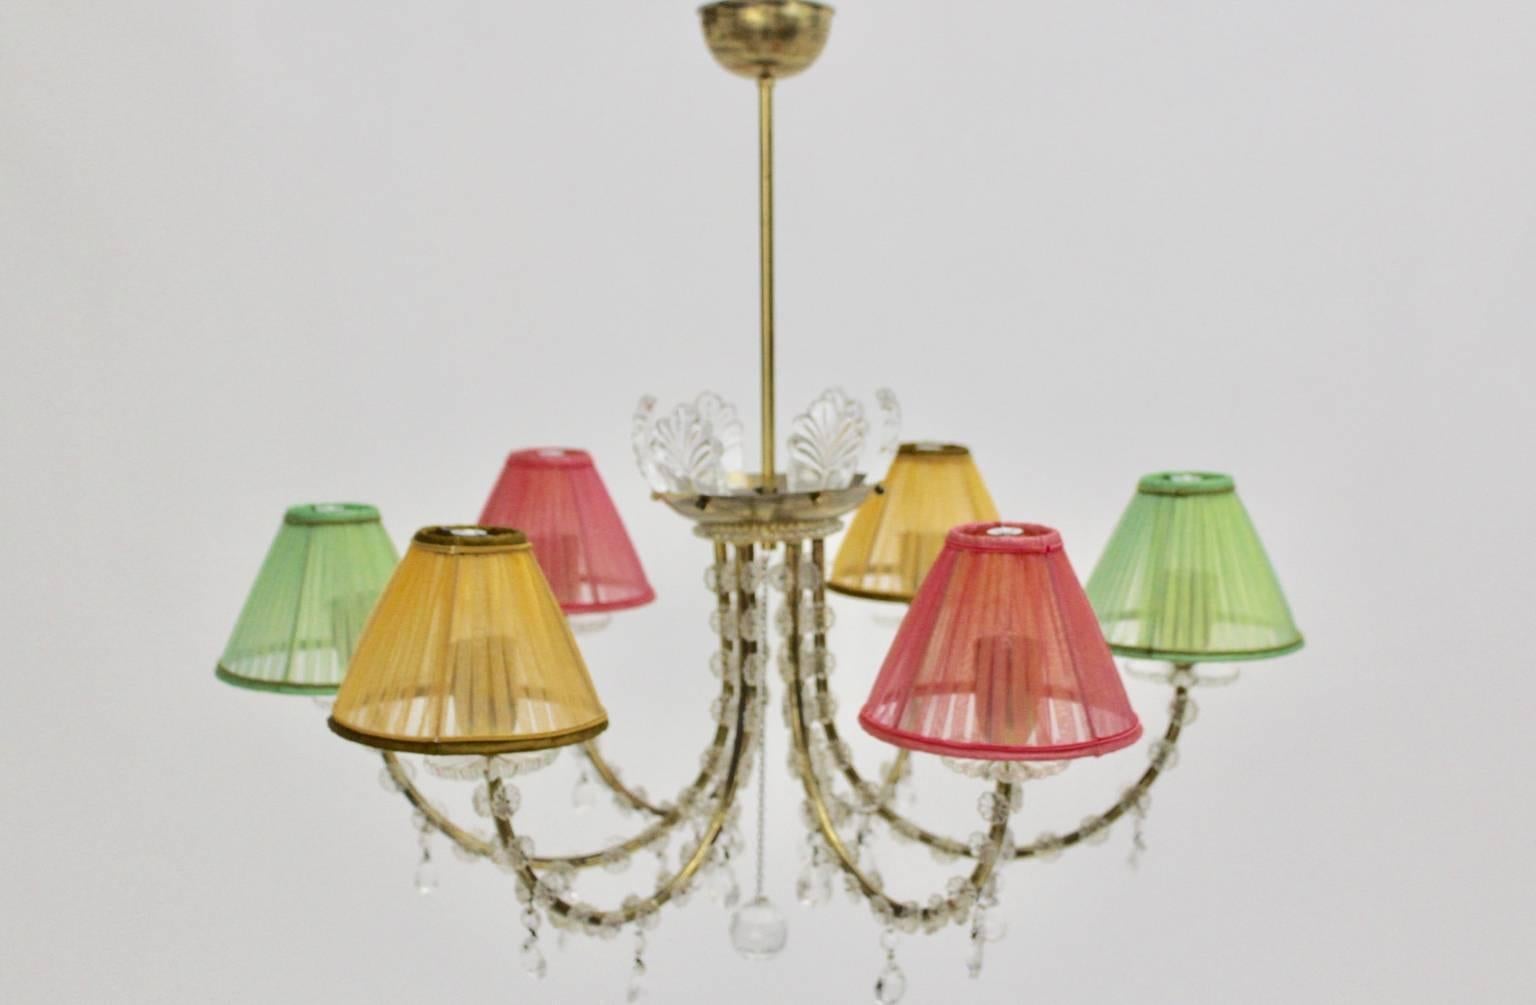 Mid Century Modern vintage brass crystal chandelier by J. & L. Lobmeyr, which is decorated with beautiful glass flowers and crystal elements.
This high-quality chandelier was designed and executed by J. & L. Lobmeyr Vienna Austria.

The chandelier